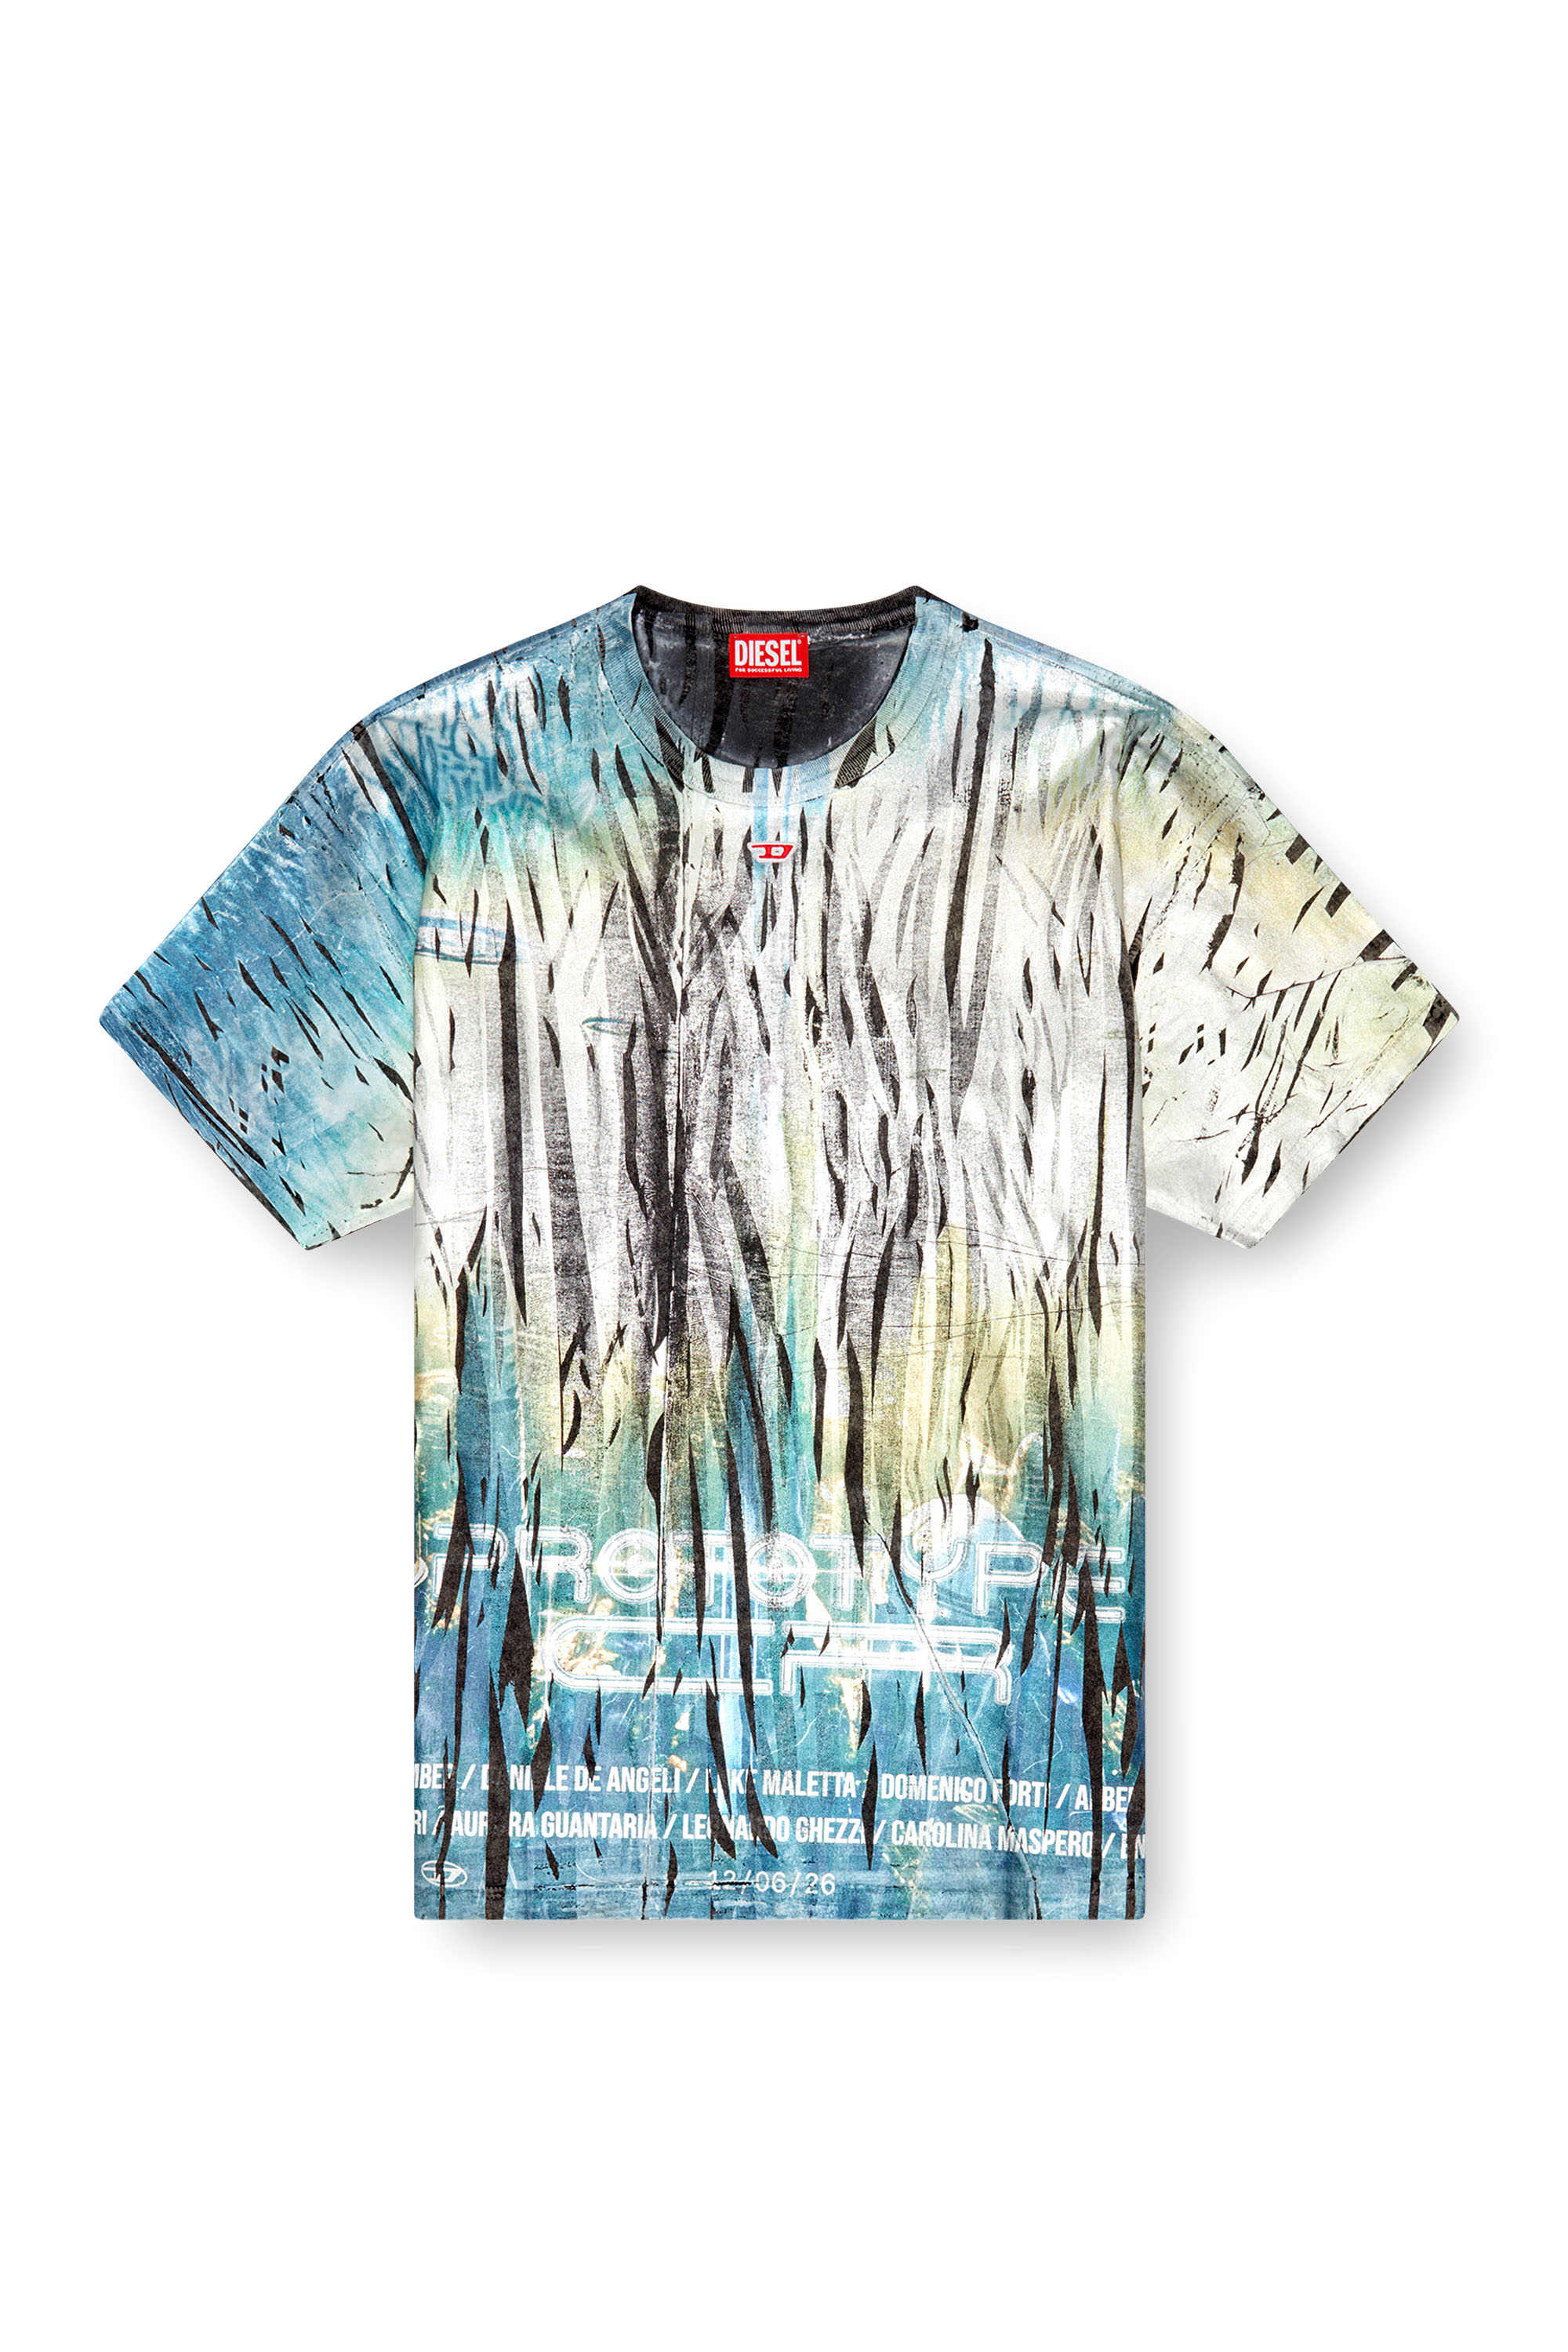 Diesel - T-BORD-Q1, Male T-shirt with creased foil treatment in マルチカラー - Image 3